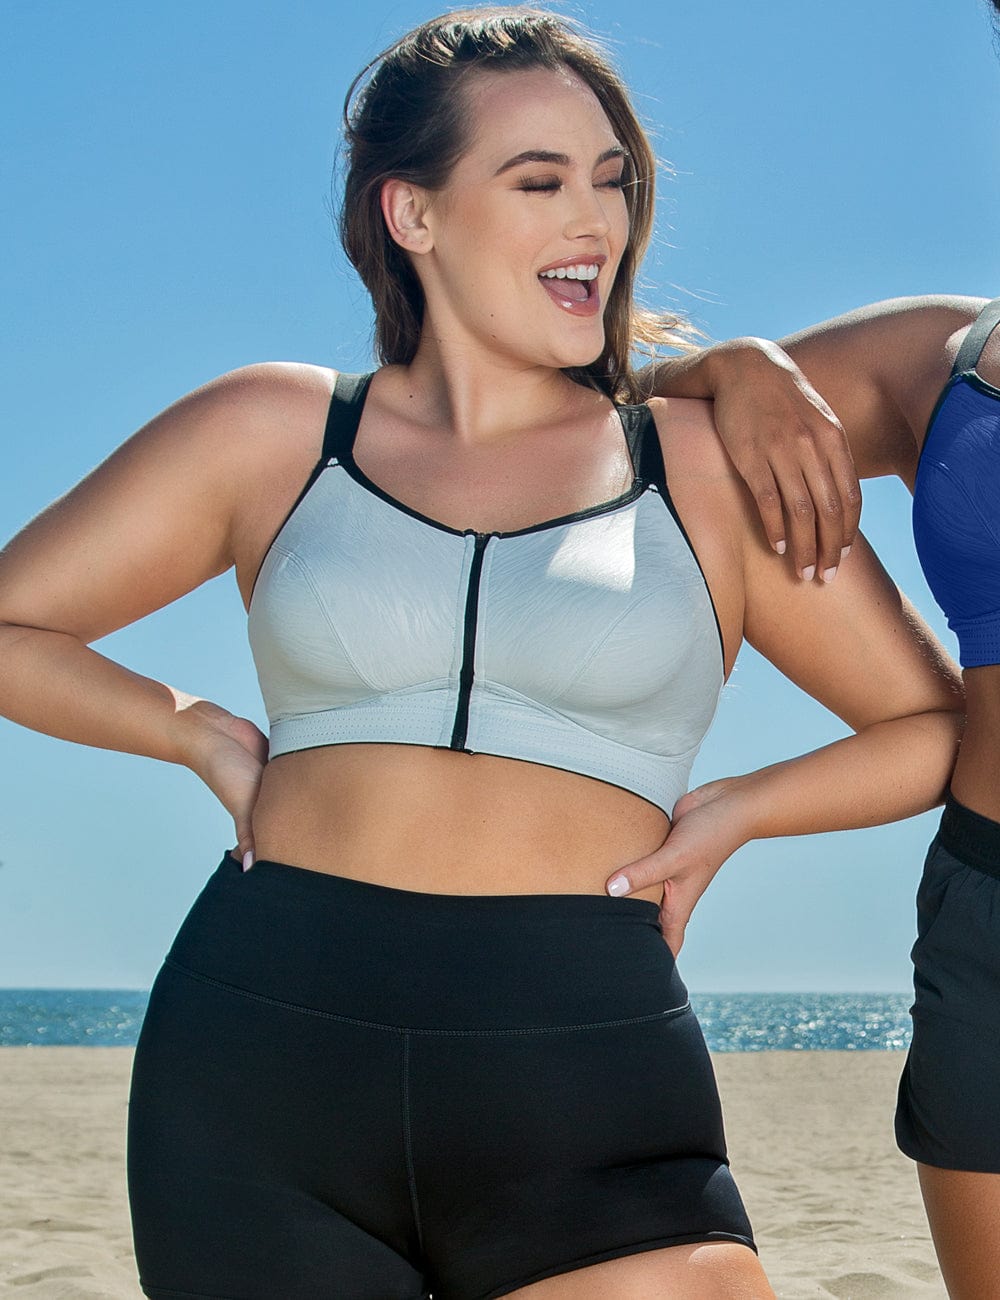 Sports Bras for sale in Madison, Maine